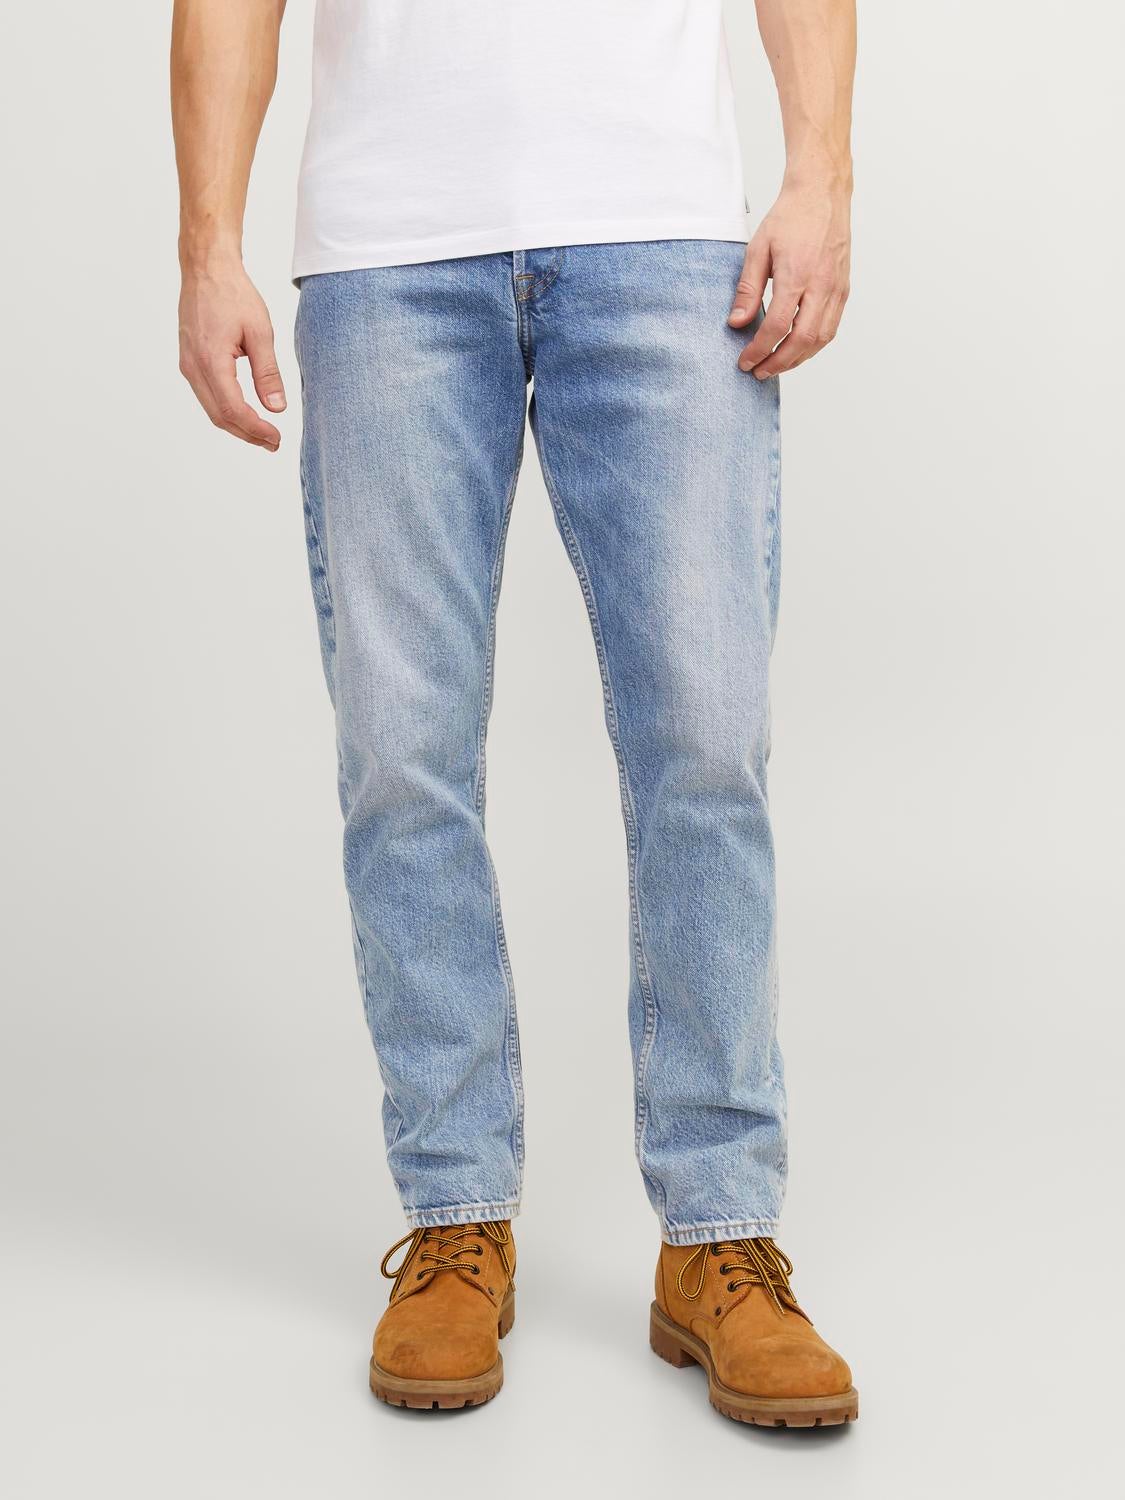 Buy JACK AND JONES Mens Slim Fit Heavy Wash Distressed Jeans | Shoppers Stop